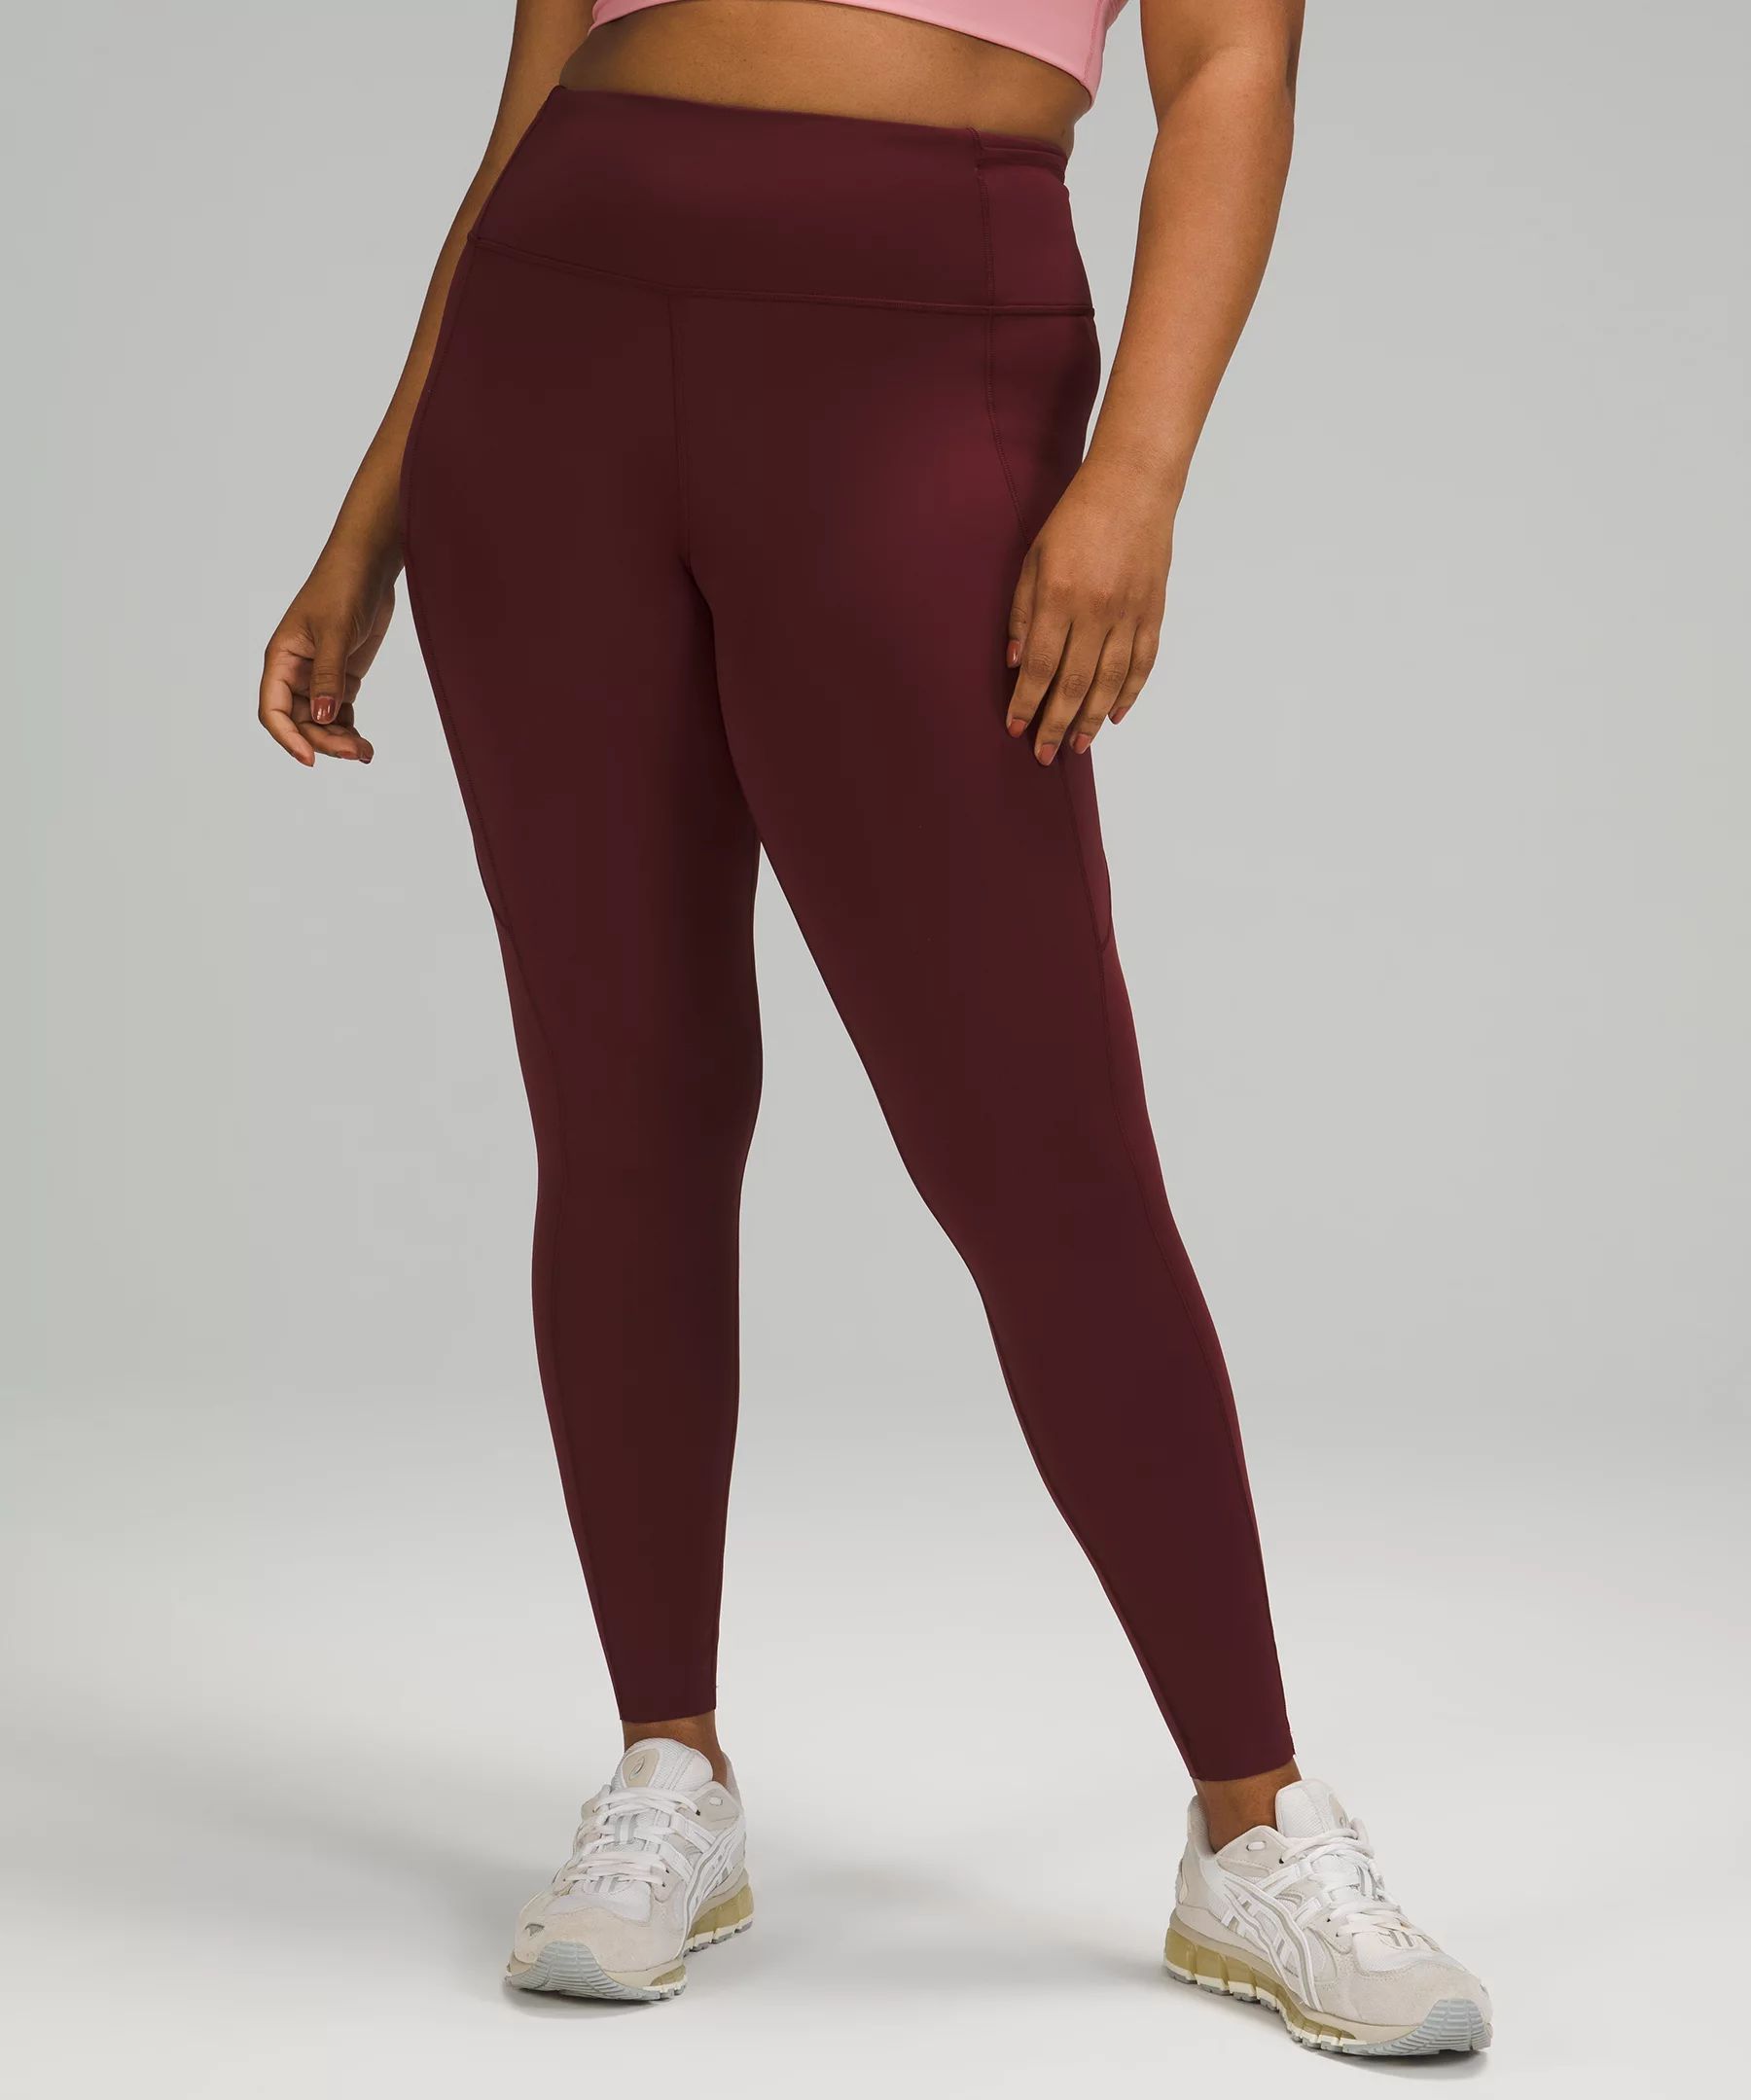 Fast and Free High-Rise Tight 28" | Lululemon (US)